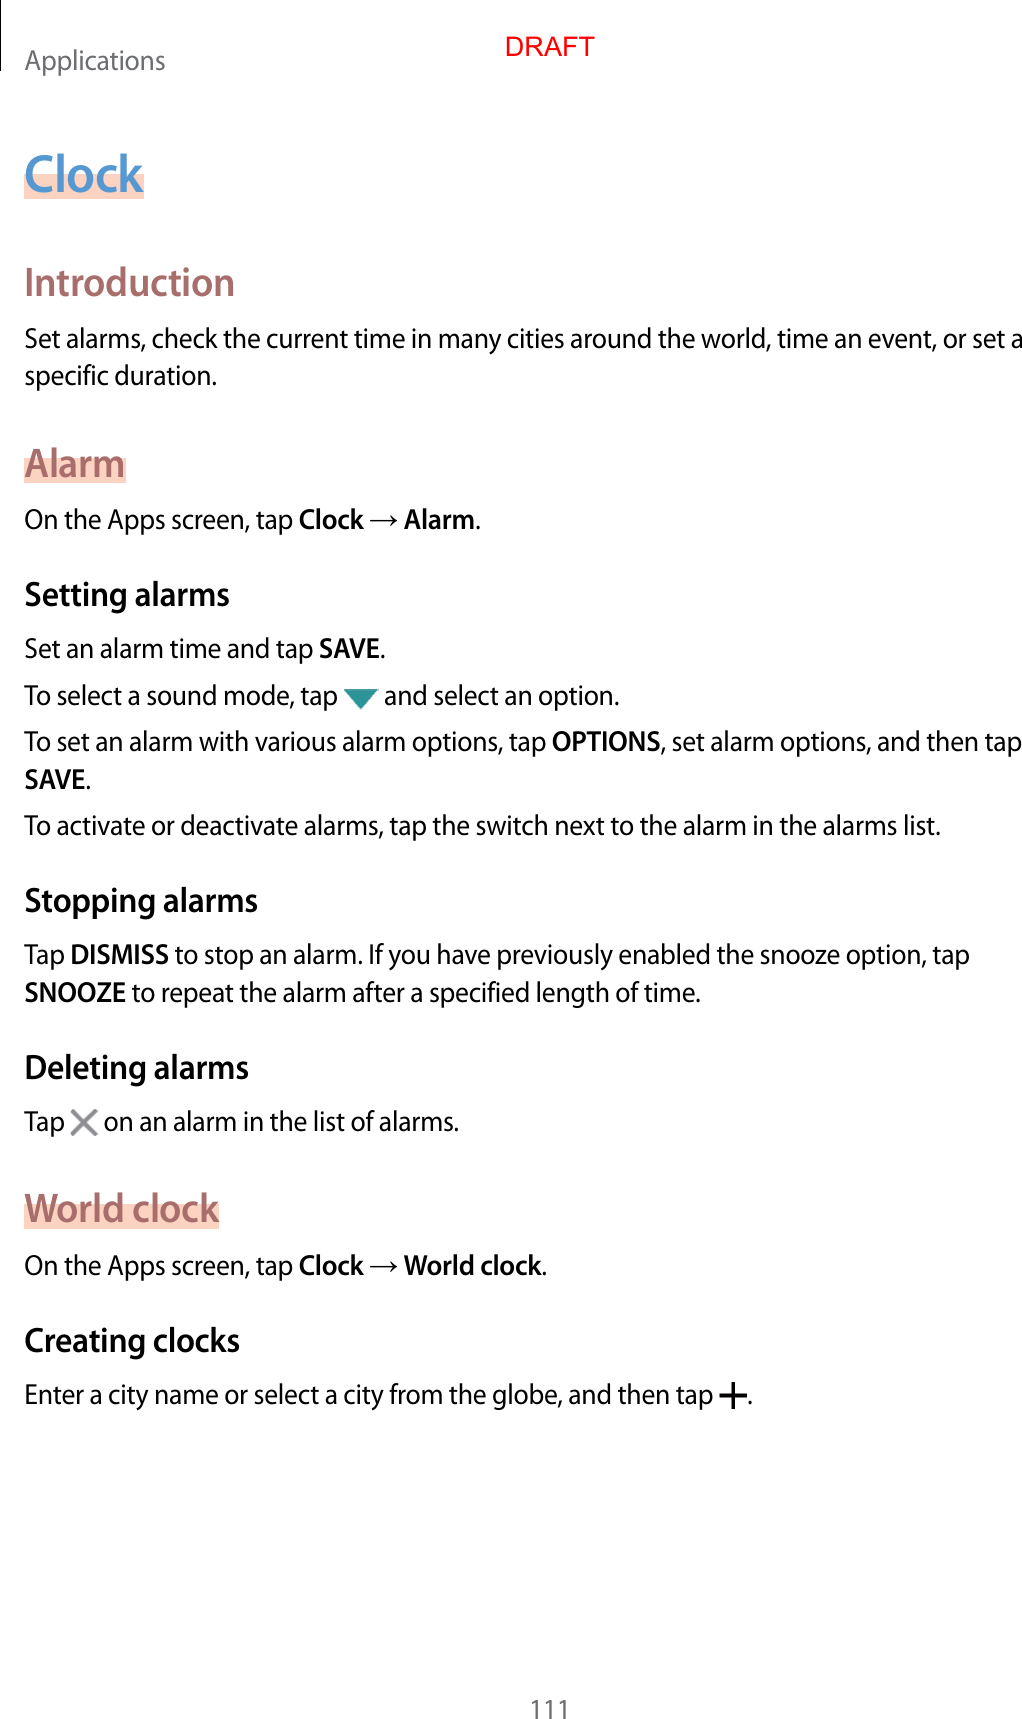 Applications111ClockIntroductionSet alarms, check the current time in many cities around the world, time an event, or set a specific duration.AlarmOn the Apps screen, tap Clock  Alarm.Setting alarmsSet an alarm time and tap SAVE.To select a sound mode, tap   and select an option.To set an alarm with various alarm options, tap OPTIONS, set alarm options, and then tap SAVE.To activate or deactivate alarms, tap the switch next to the alarm in the alarms list.Stopping alarmsTap DISMISS to stop an alarm. If you have previously enabled the snooze option, tap SNOOZE to repeat the alarm after a specified length of time.Deleting alarmsTap   on an alarm in the list of alarms.World clockOn the Apps screen, tap Clock  World clock.Creating clocksEnter a city name or select a city from the globe, and then tap  .DRAFT